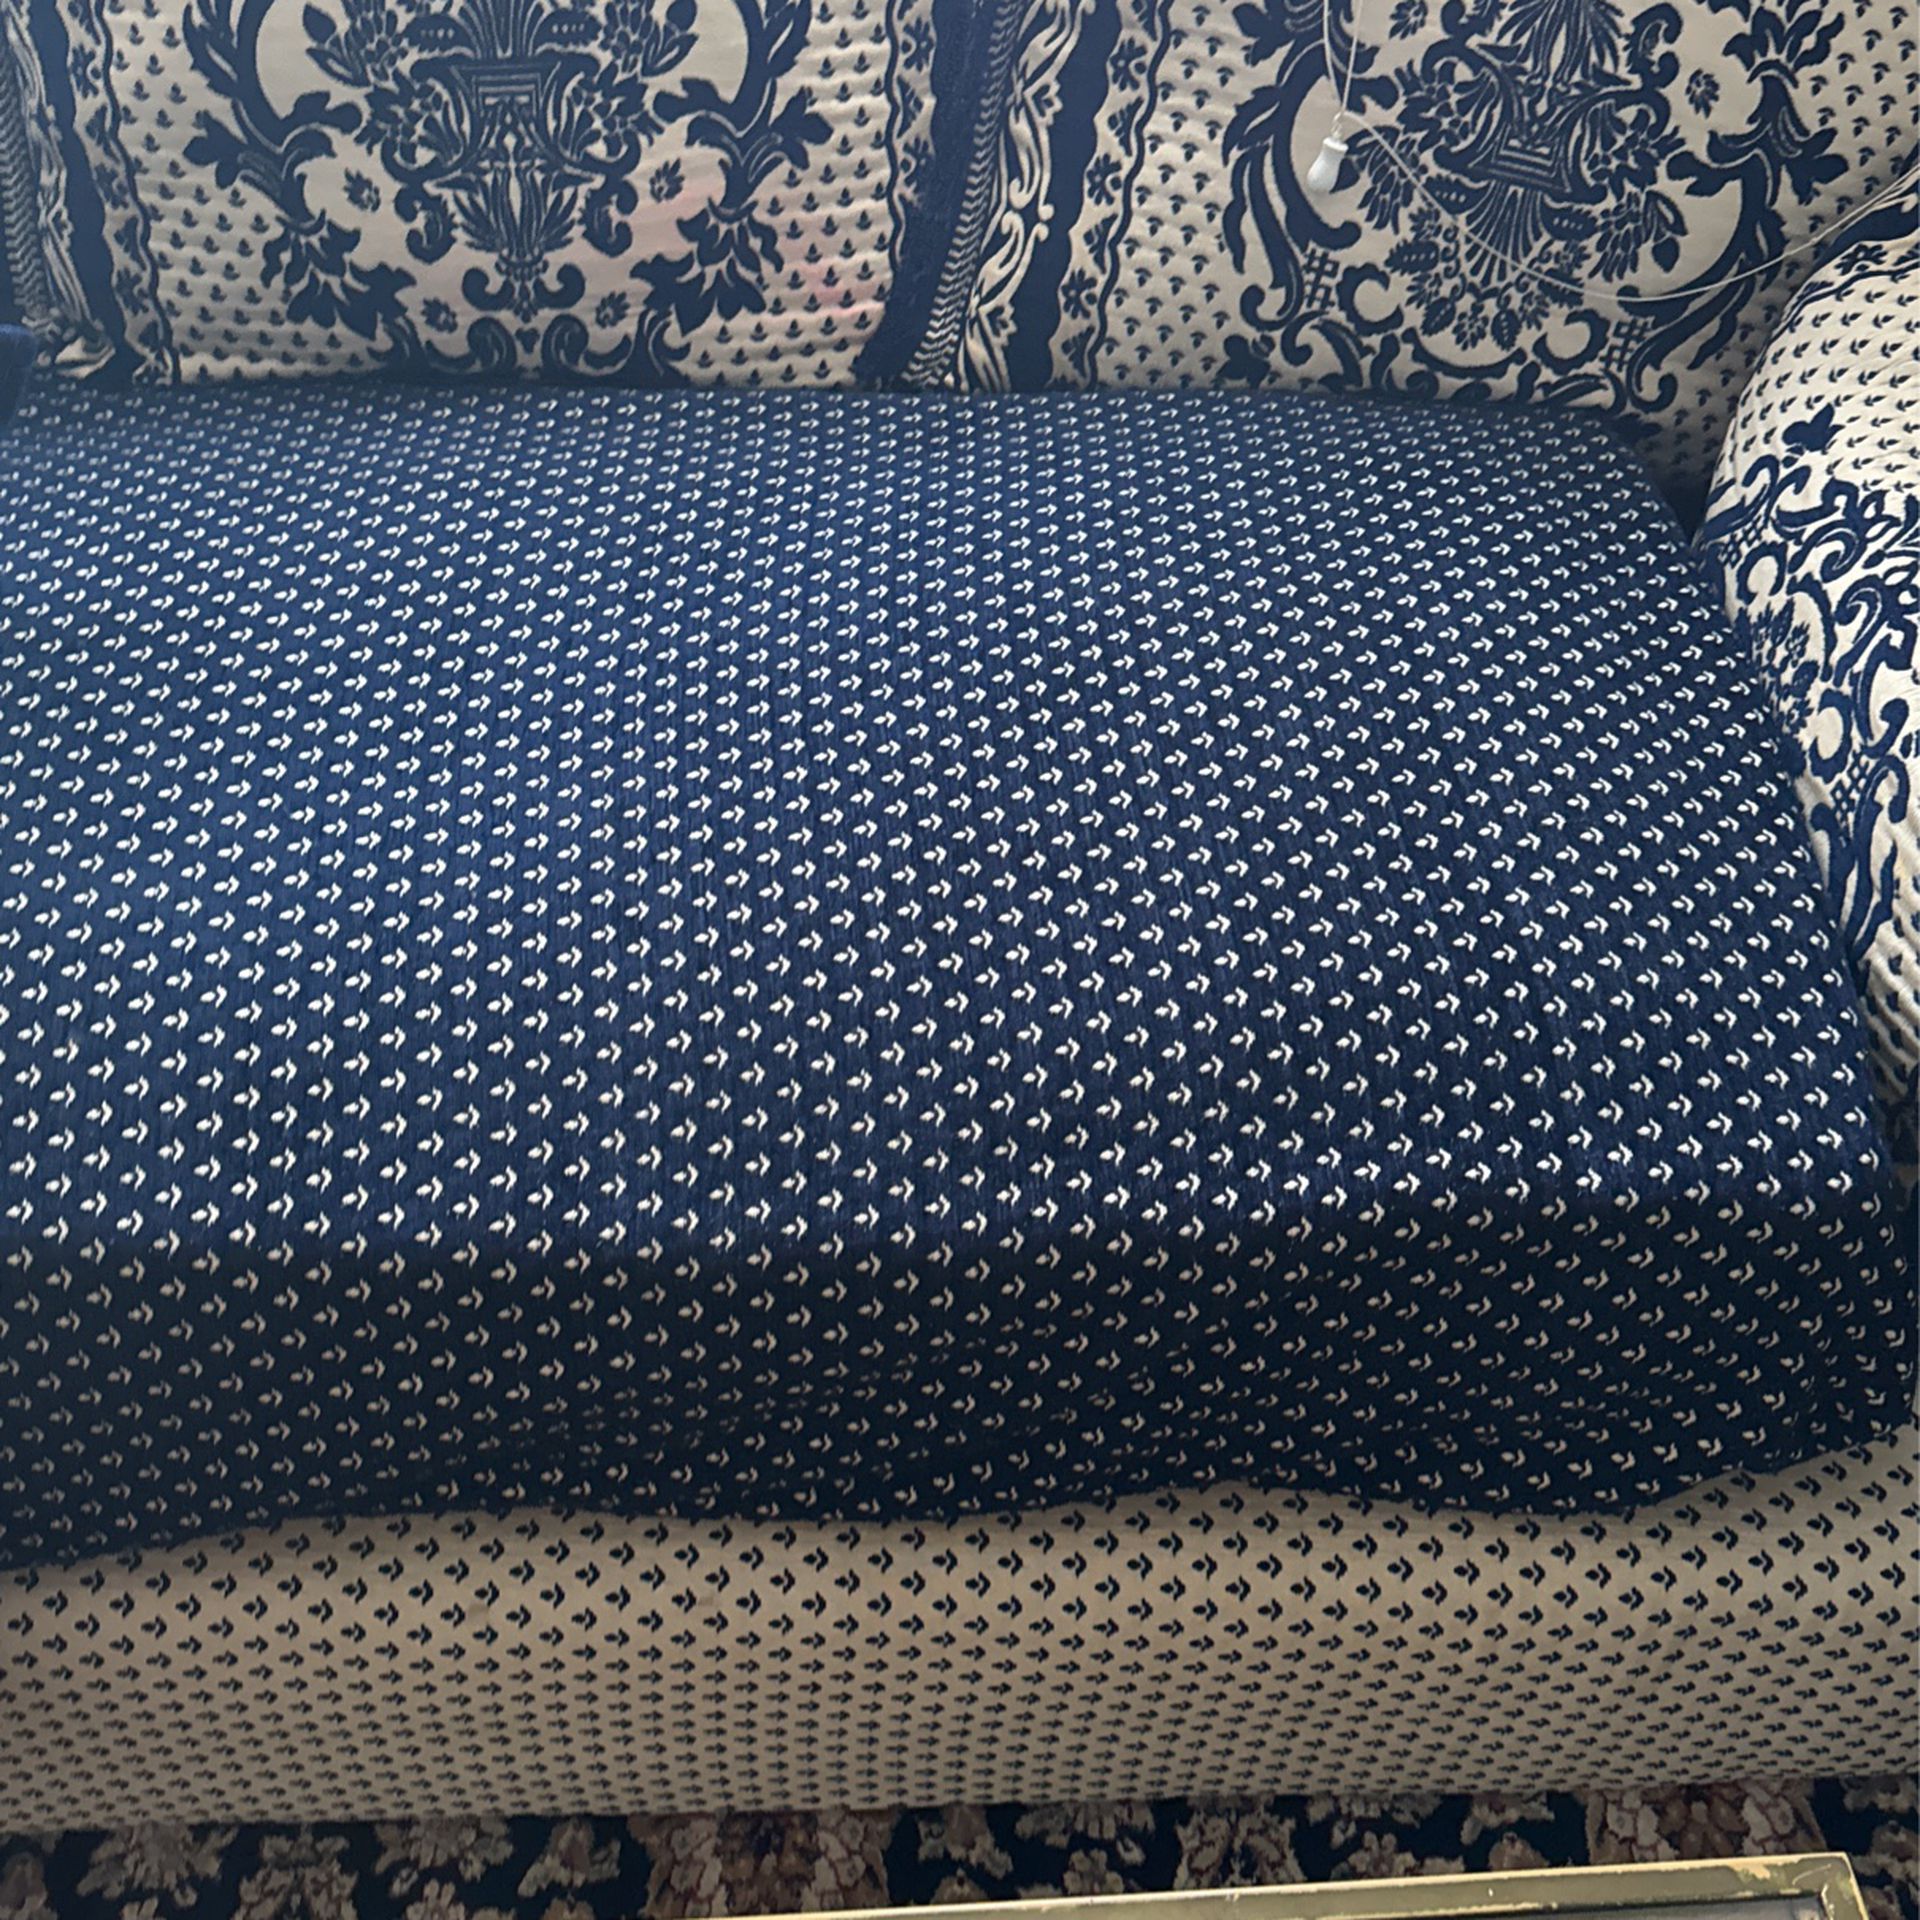 Arabic Couch 